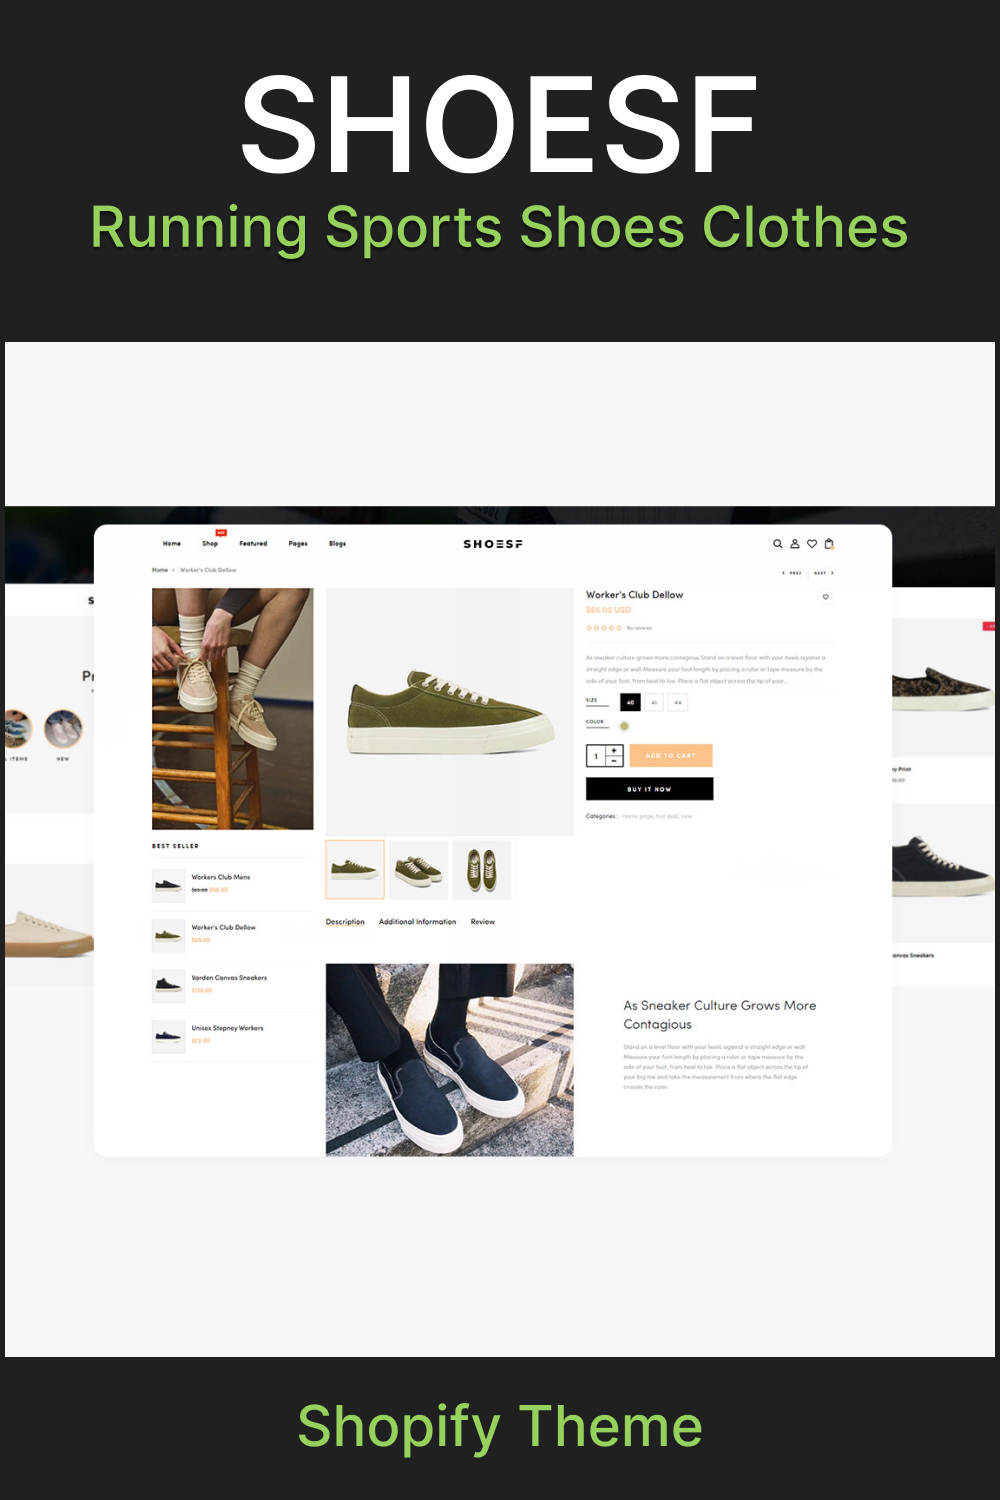 Shoesf - Running Sports Shoes Clothes Shopify Theme - Pinterest.